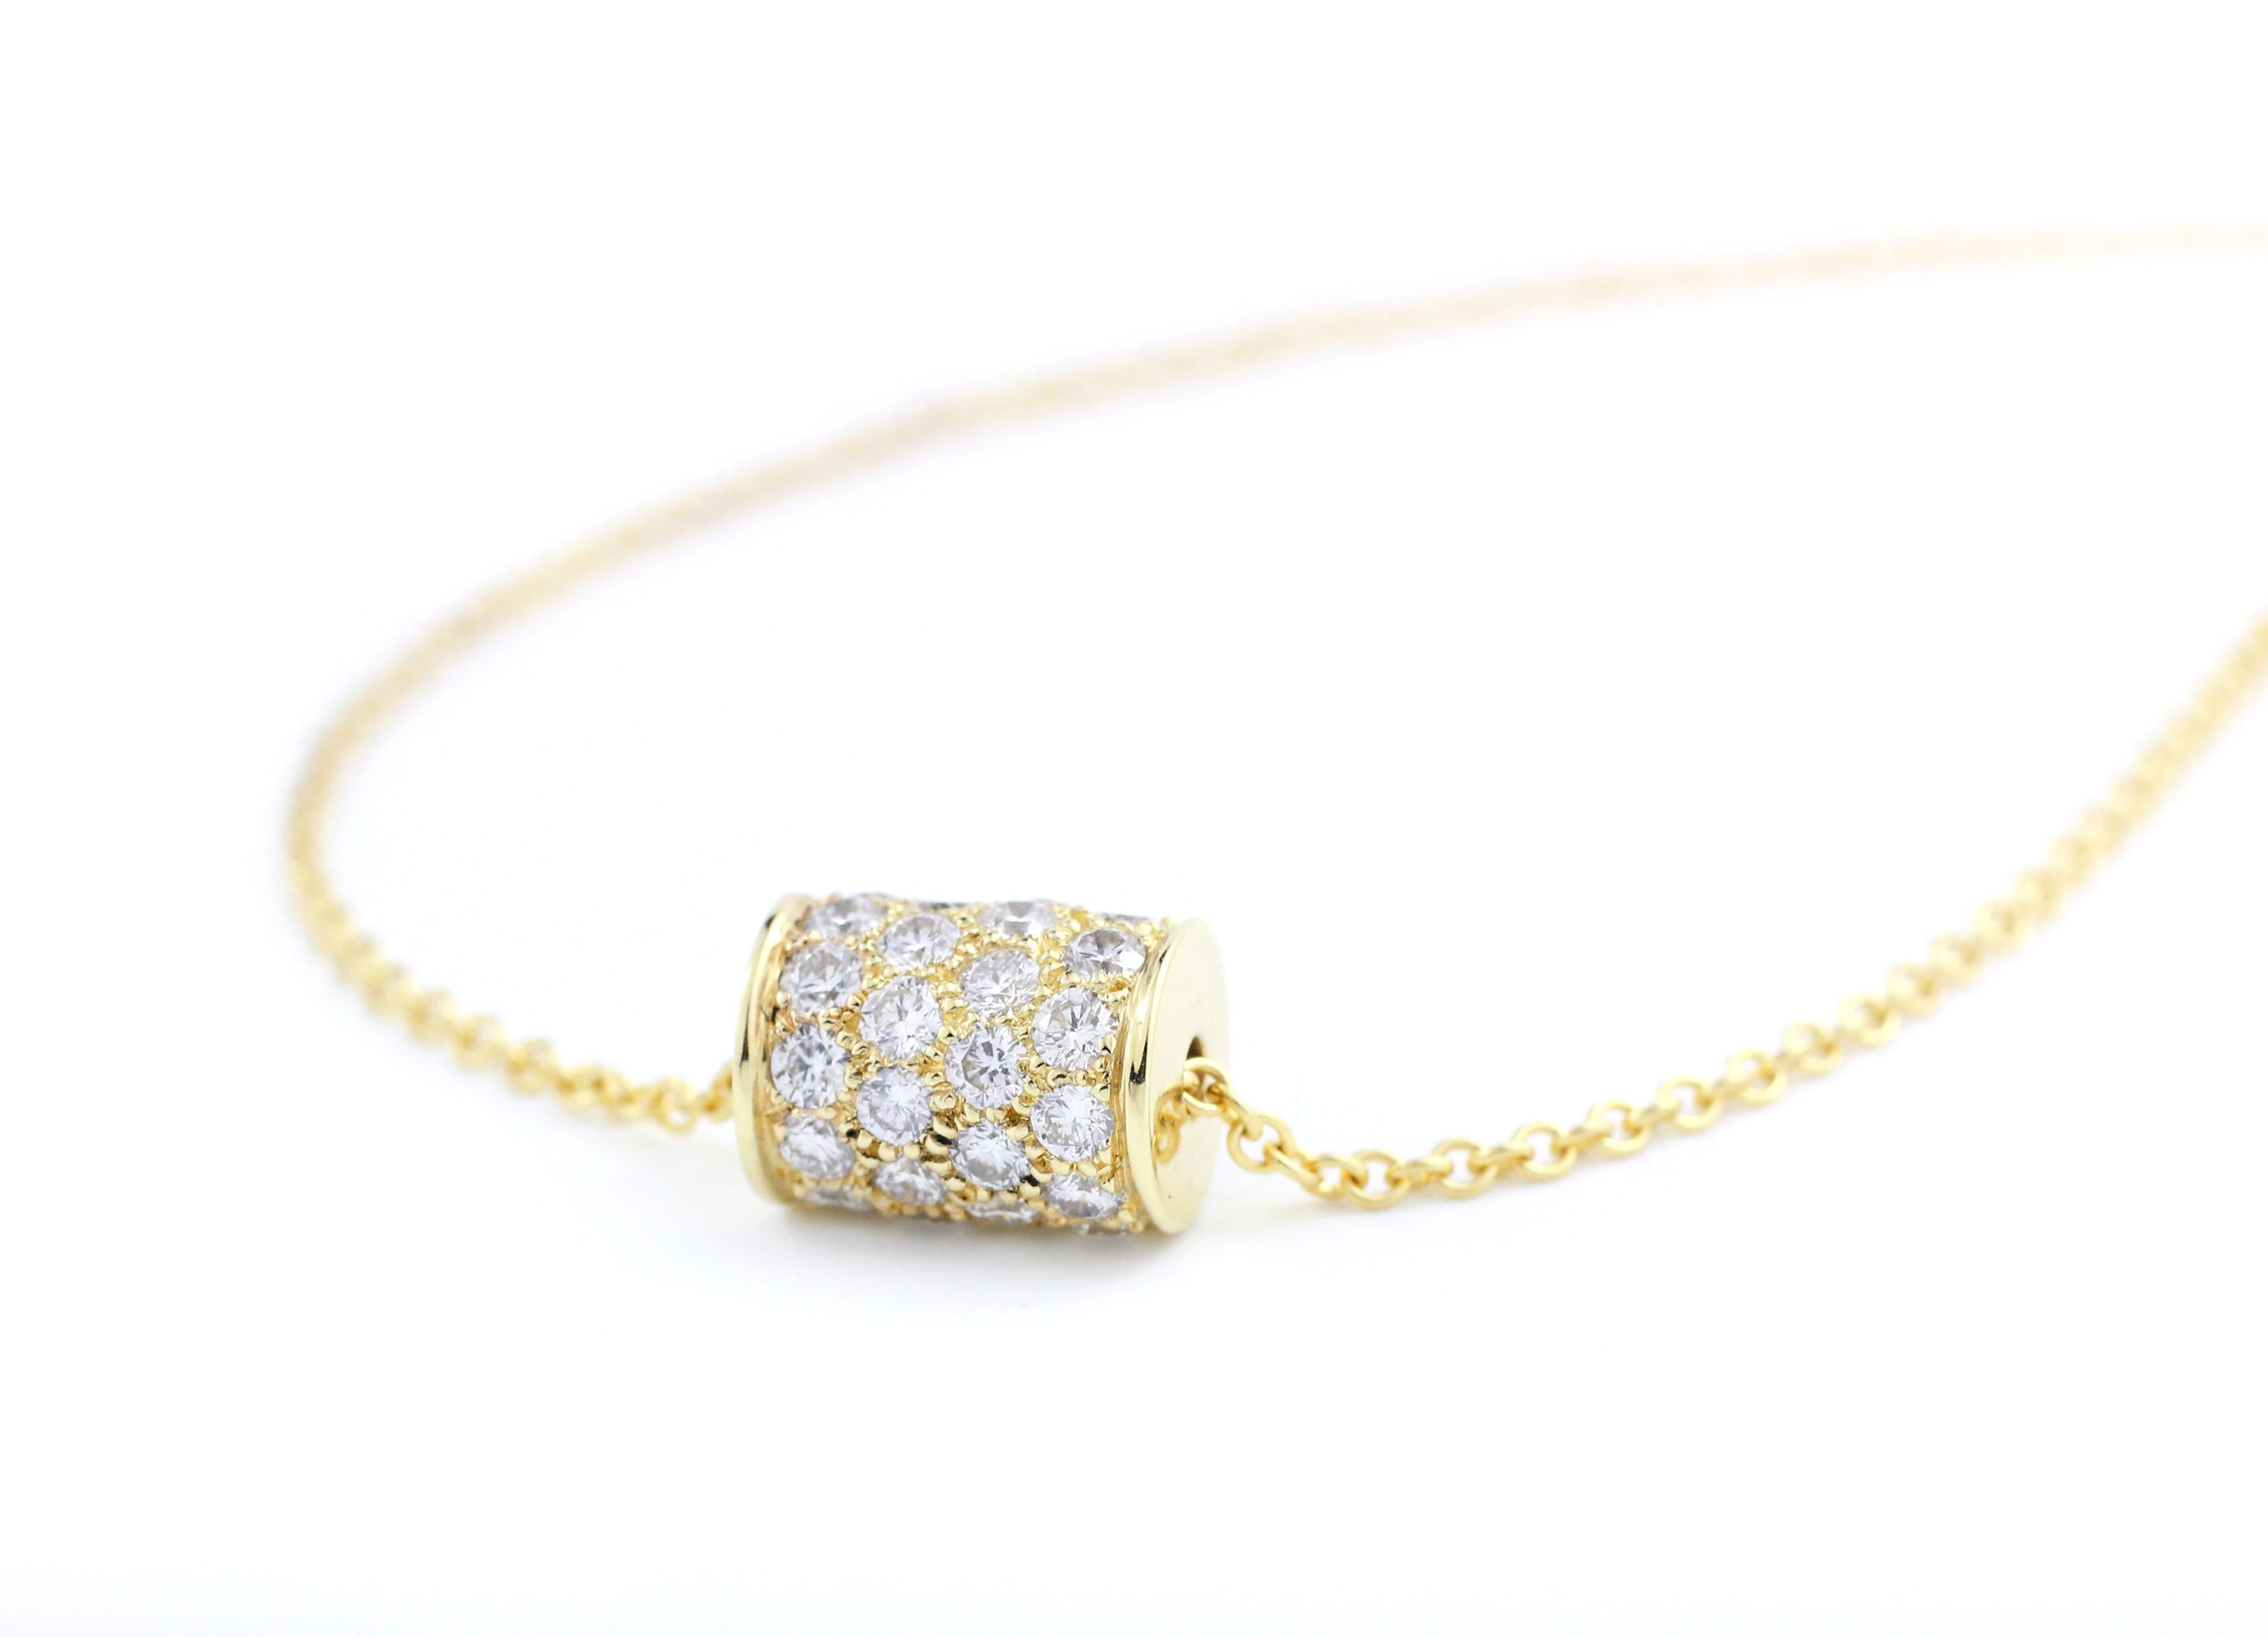 This simplified version of the classic, award winning Julius Cohen Barrel design spins and slides freely on its 18 Kt Gold Chain.  The 18 Kt Gold Barrel is set with 40 Brilliant Diamonds (1.40 Cts.).  It's a real sparkler!

Necklace Length is